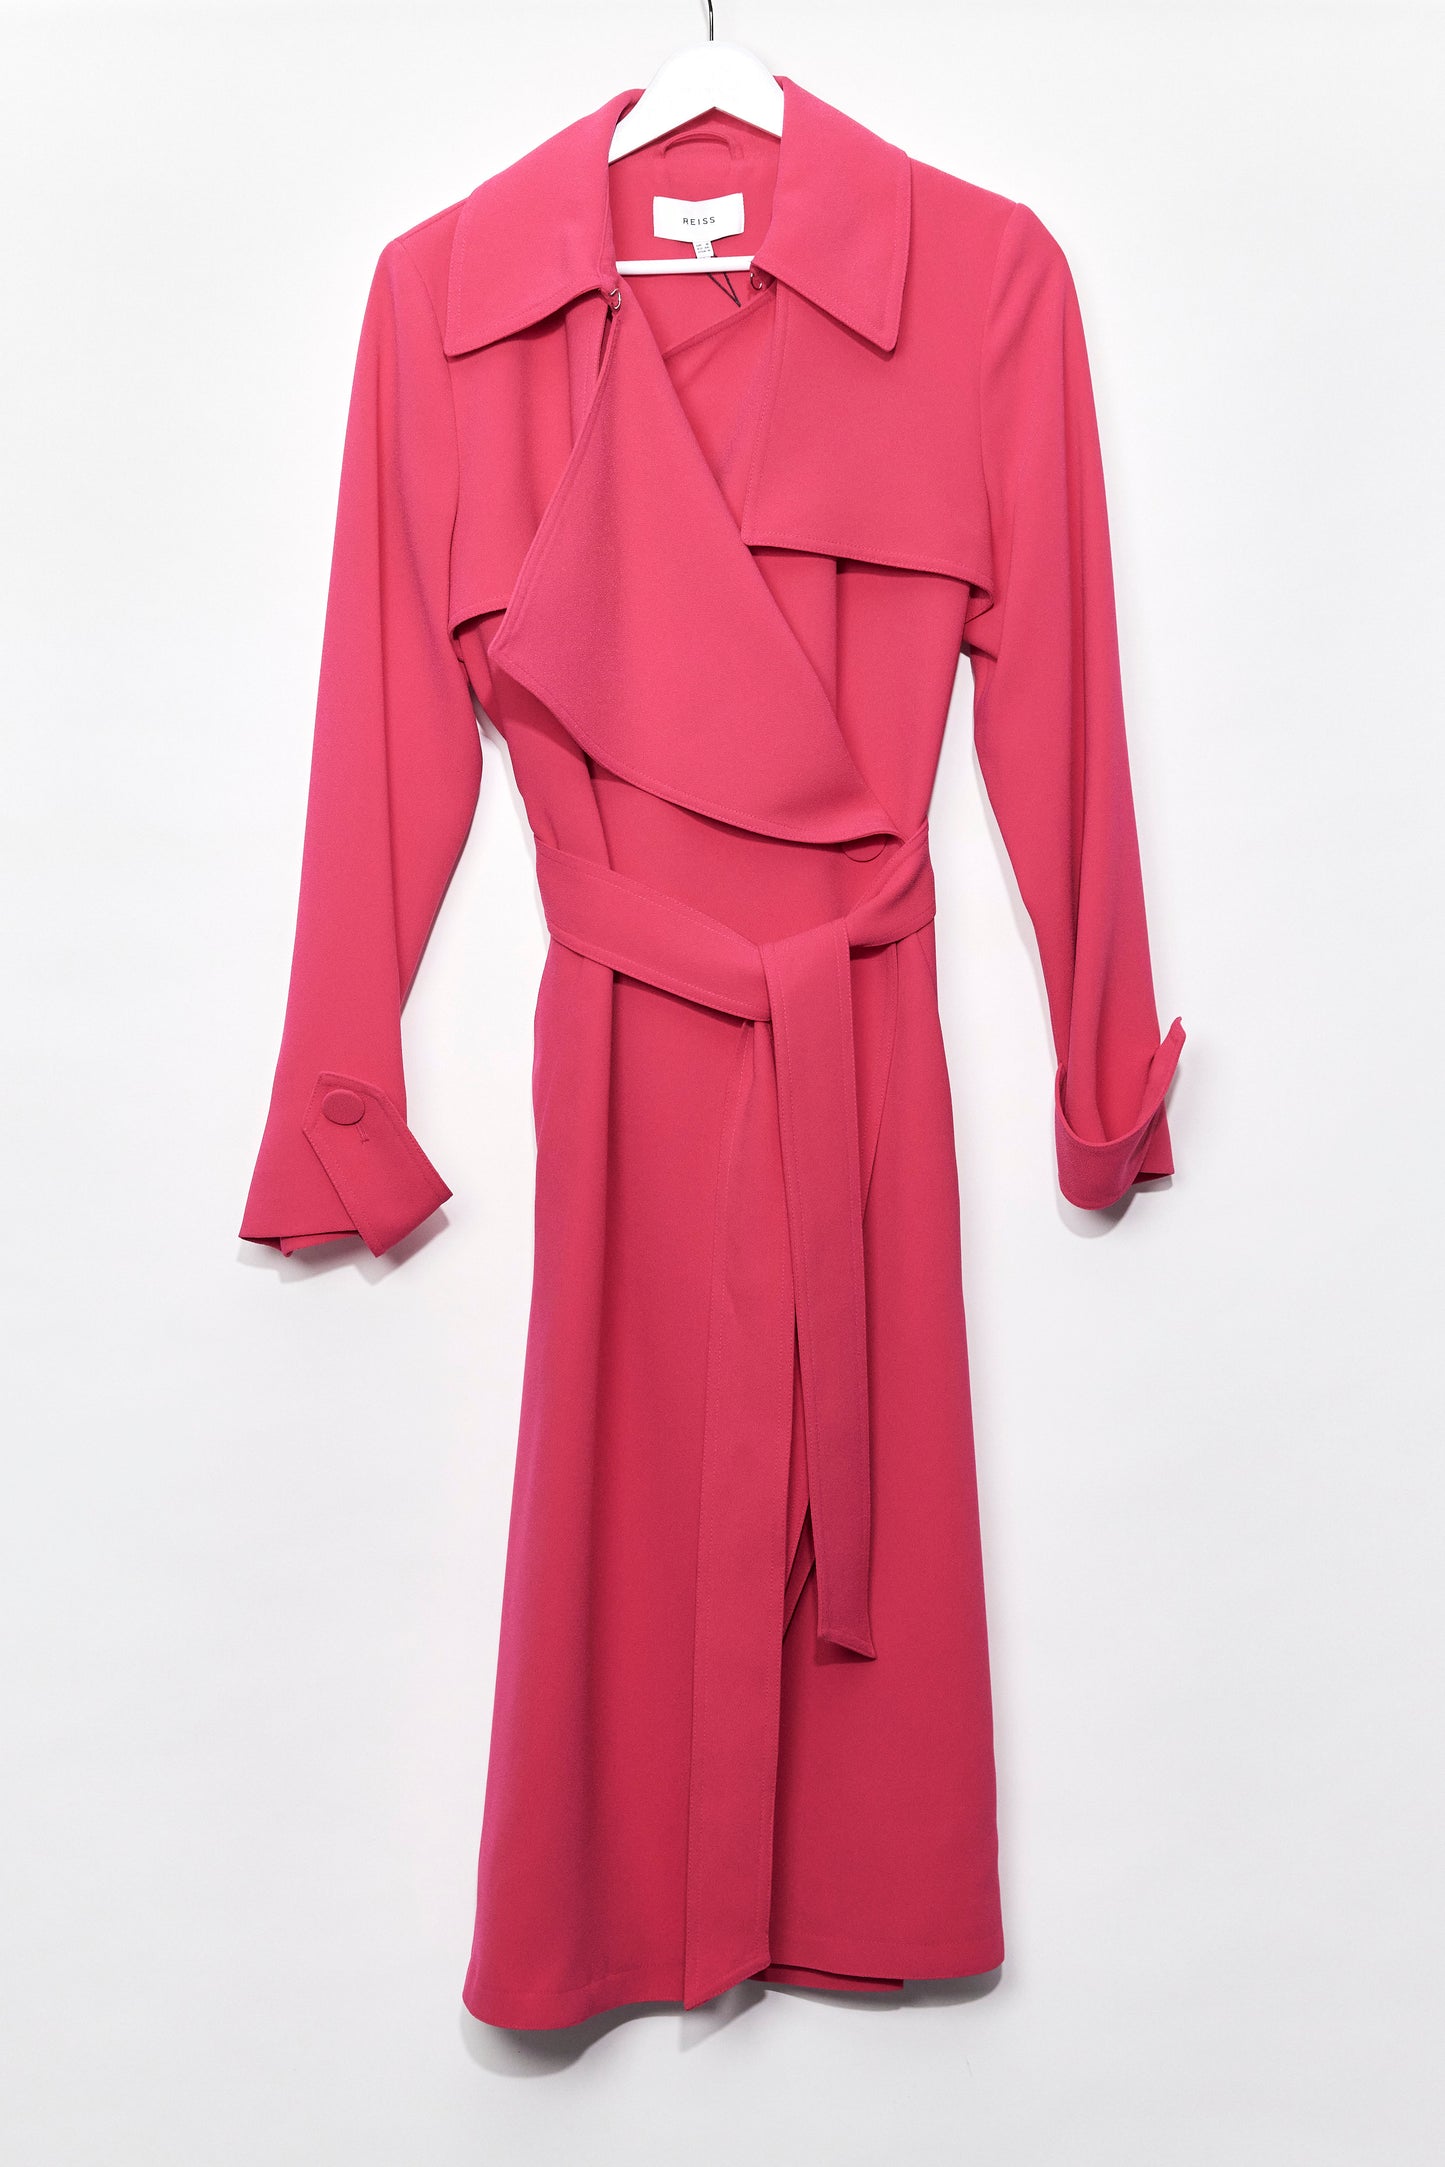 Womens Pink Reiss trench coat size 8